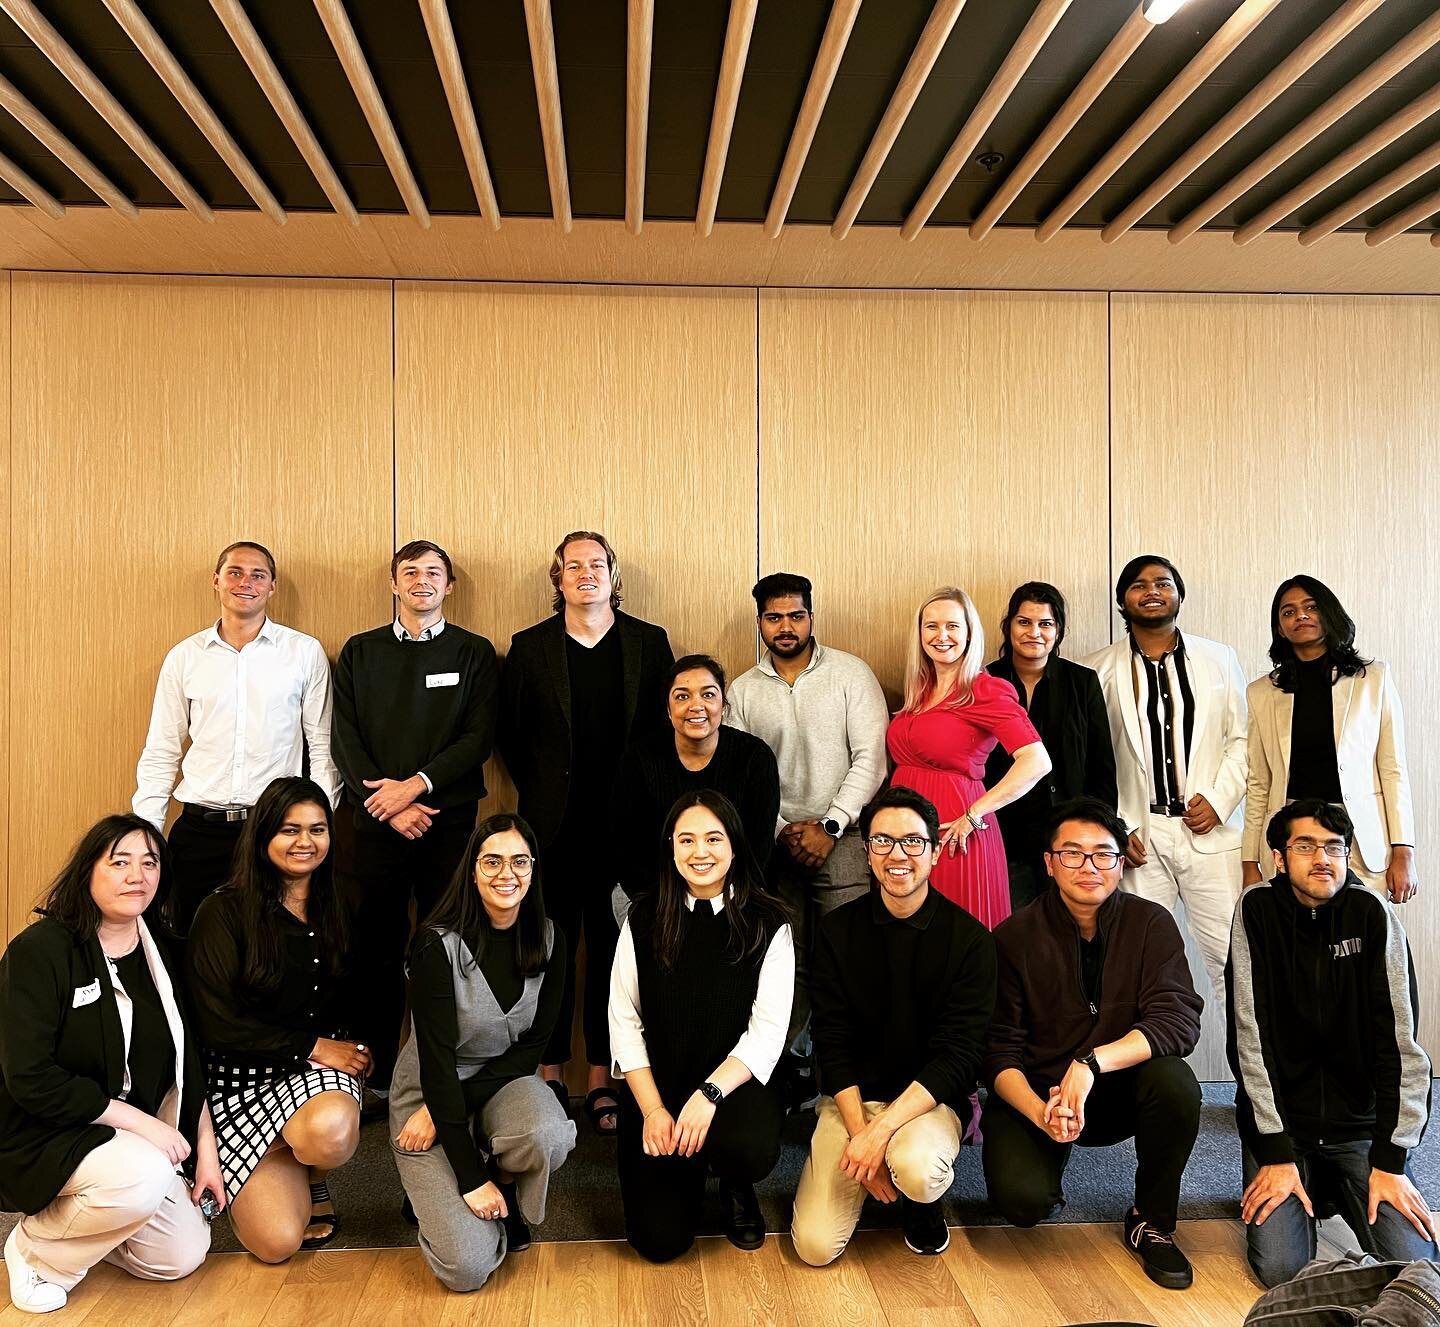 Startup Ideation - T1 2022
Incredibly proud of this group, we had some of the best presentations in the history of this program.
Congratulations to the four winners!

Our next cohort of Startup Ideation will be the last for SPARK Deakin, as the unive